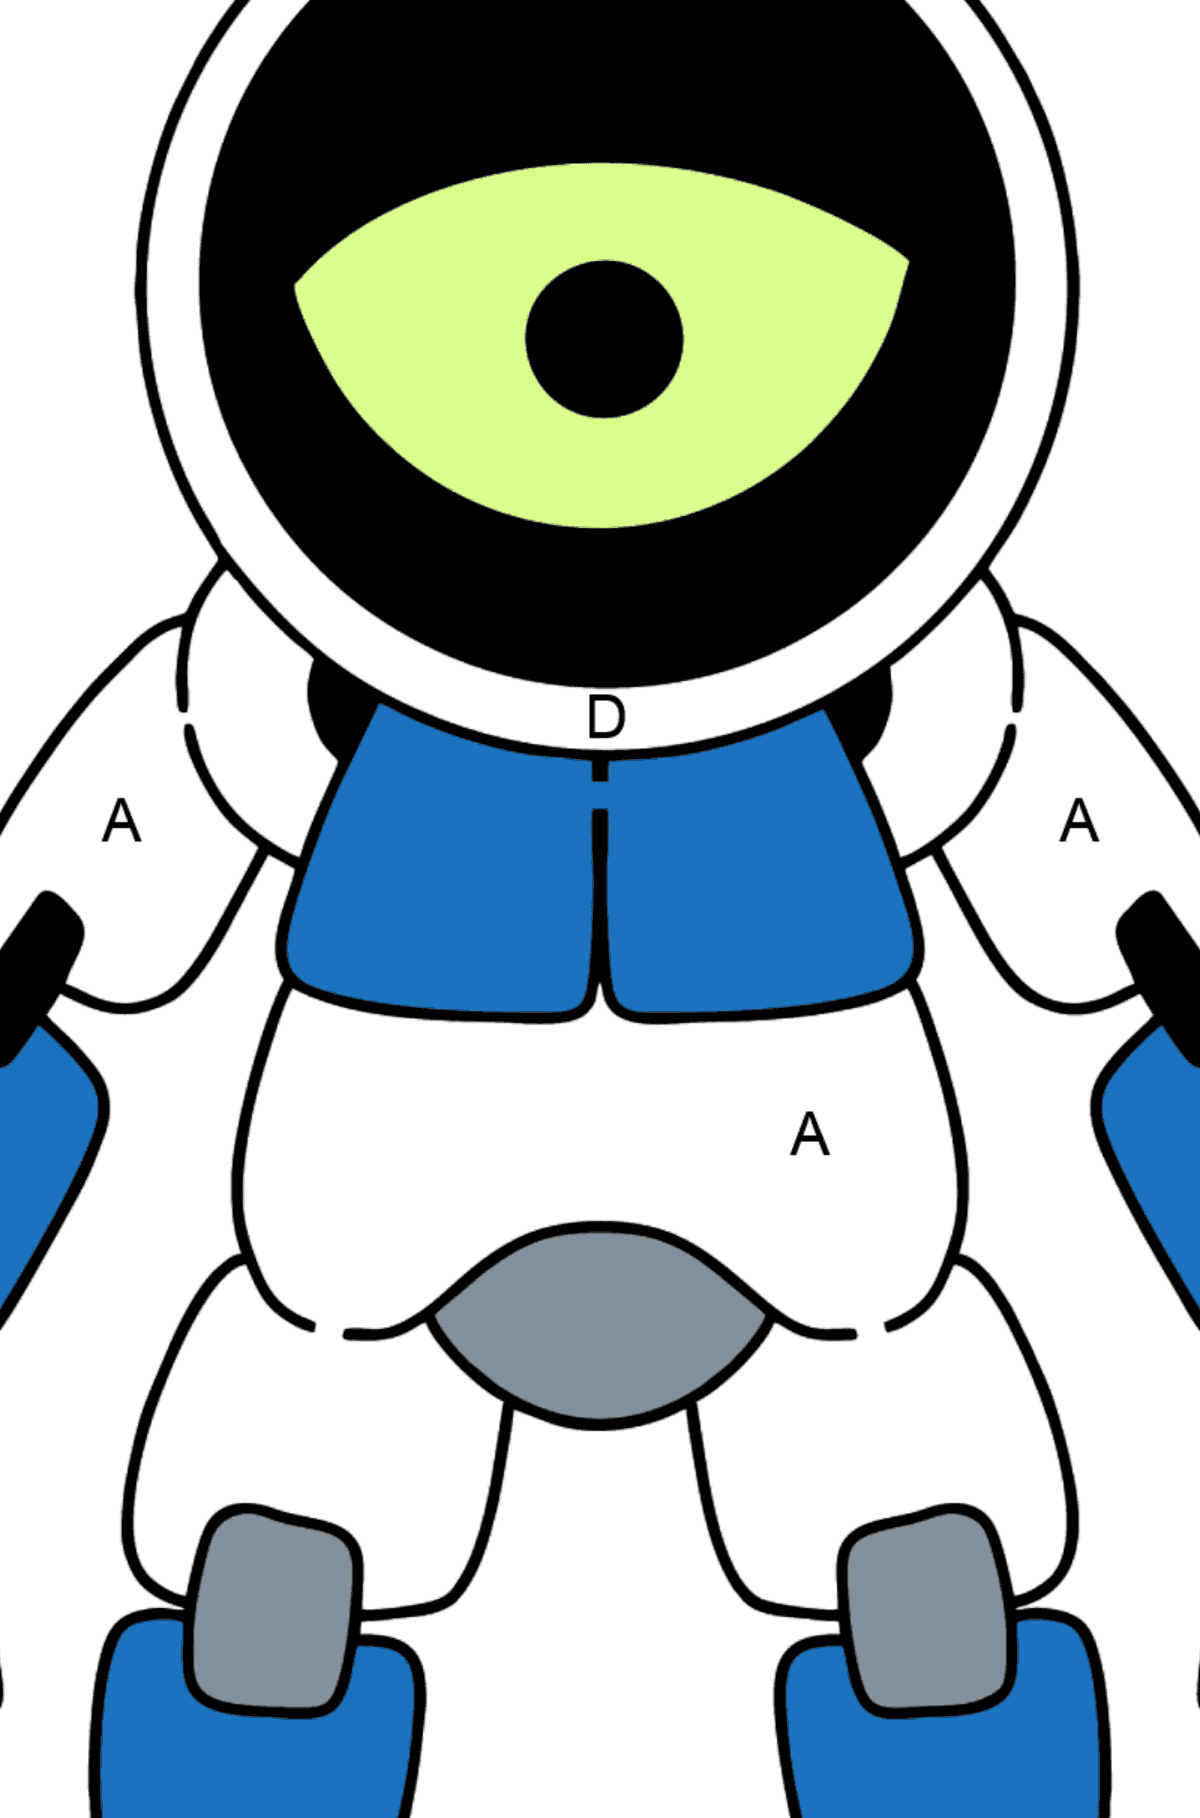 Cyclops Robot coloring page - Coloring by Letters for Kids